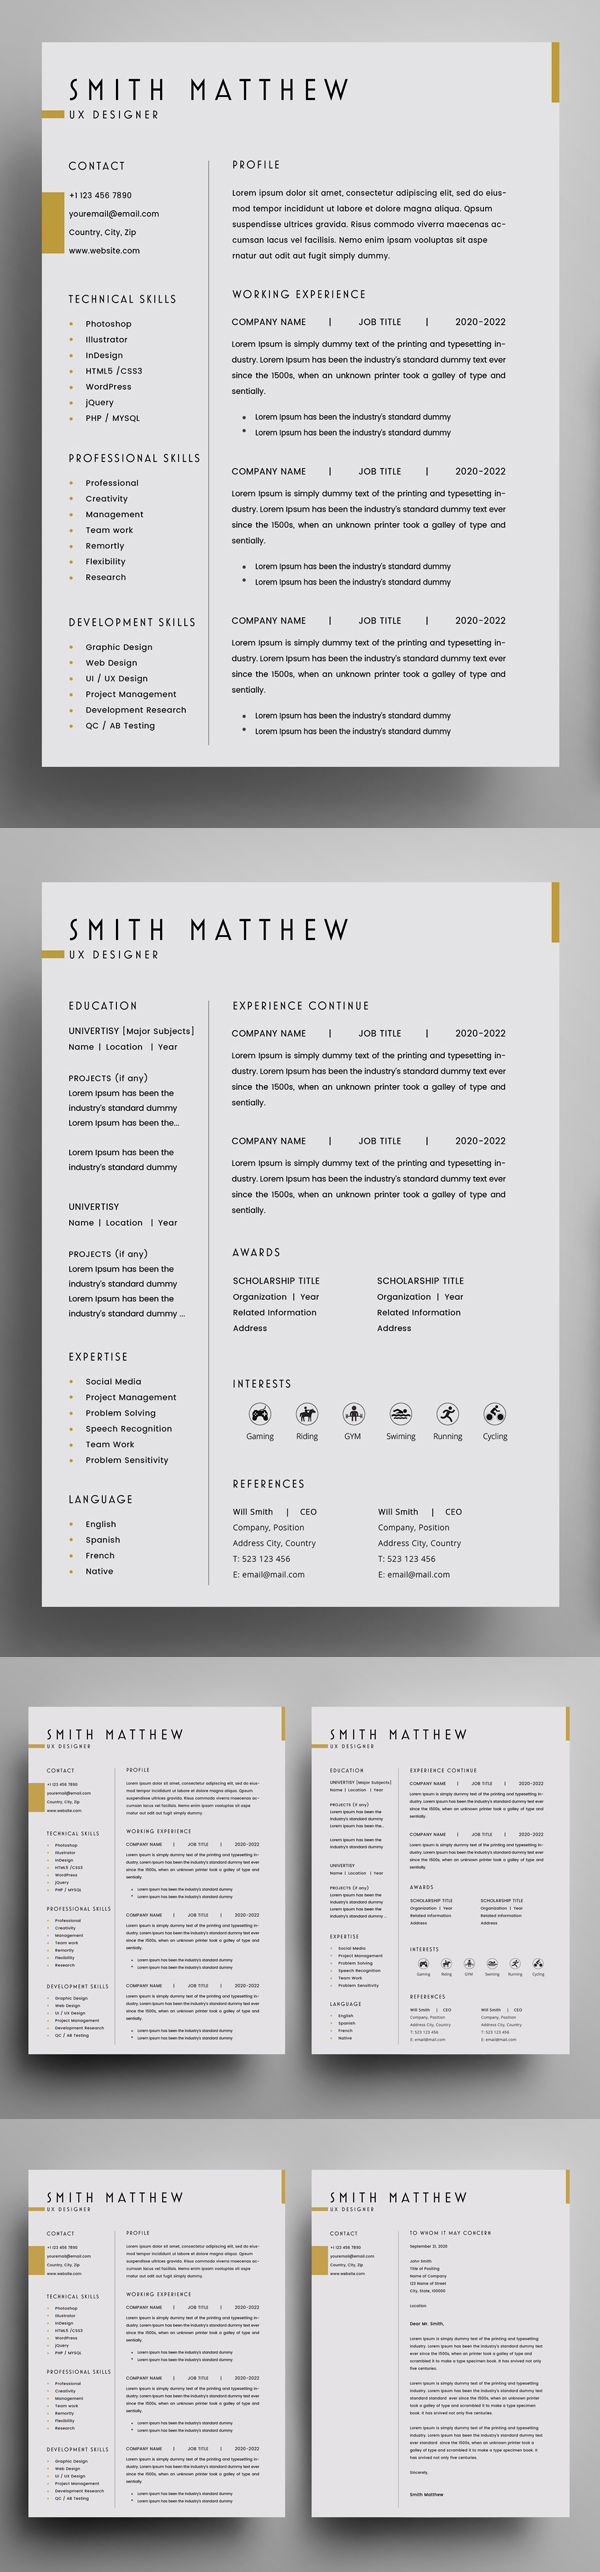 Free Resume Template (2 Pages Resume)